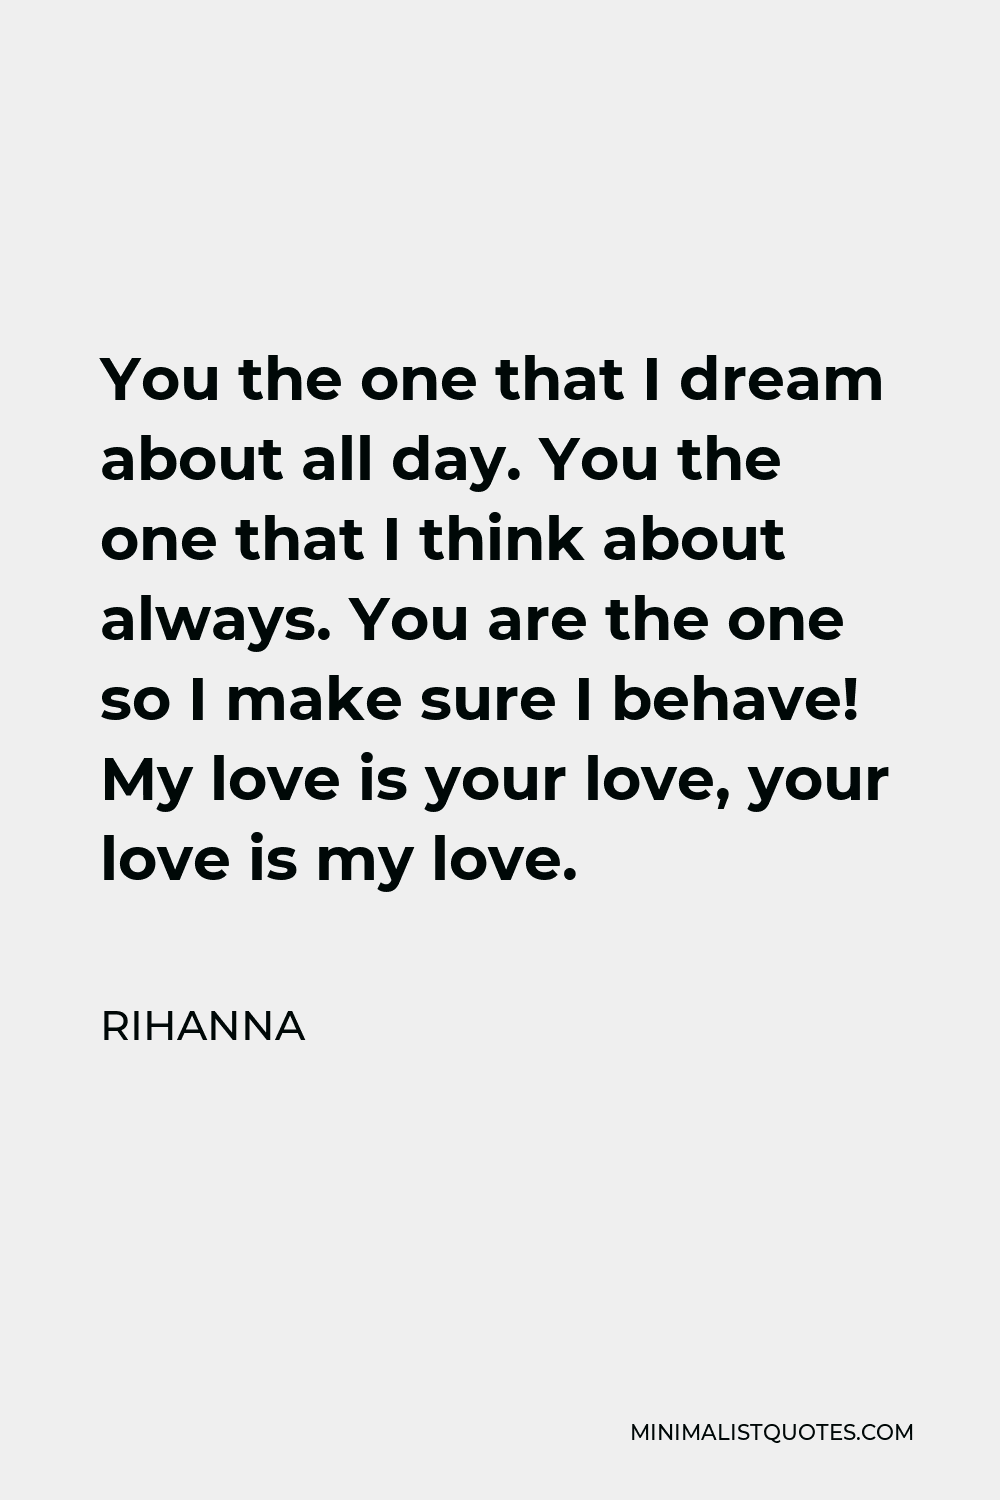 Rihanna Quote - You the one that I dream about all day. You the one that I think about always. You are the one so I make sure I behave! My love is your love, your love is my love.